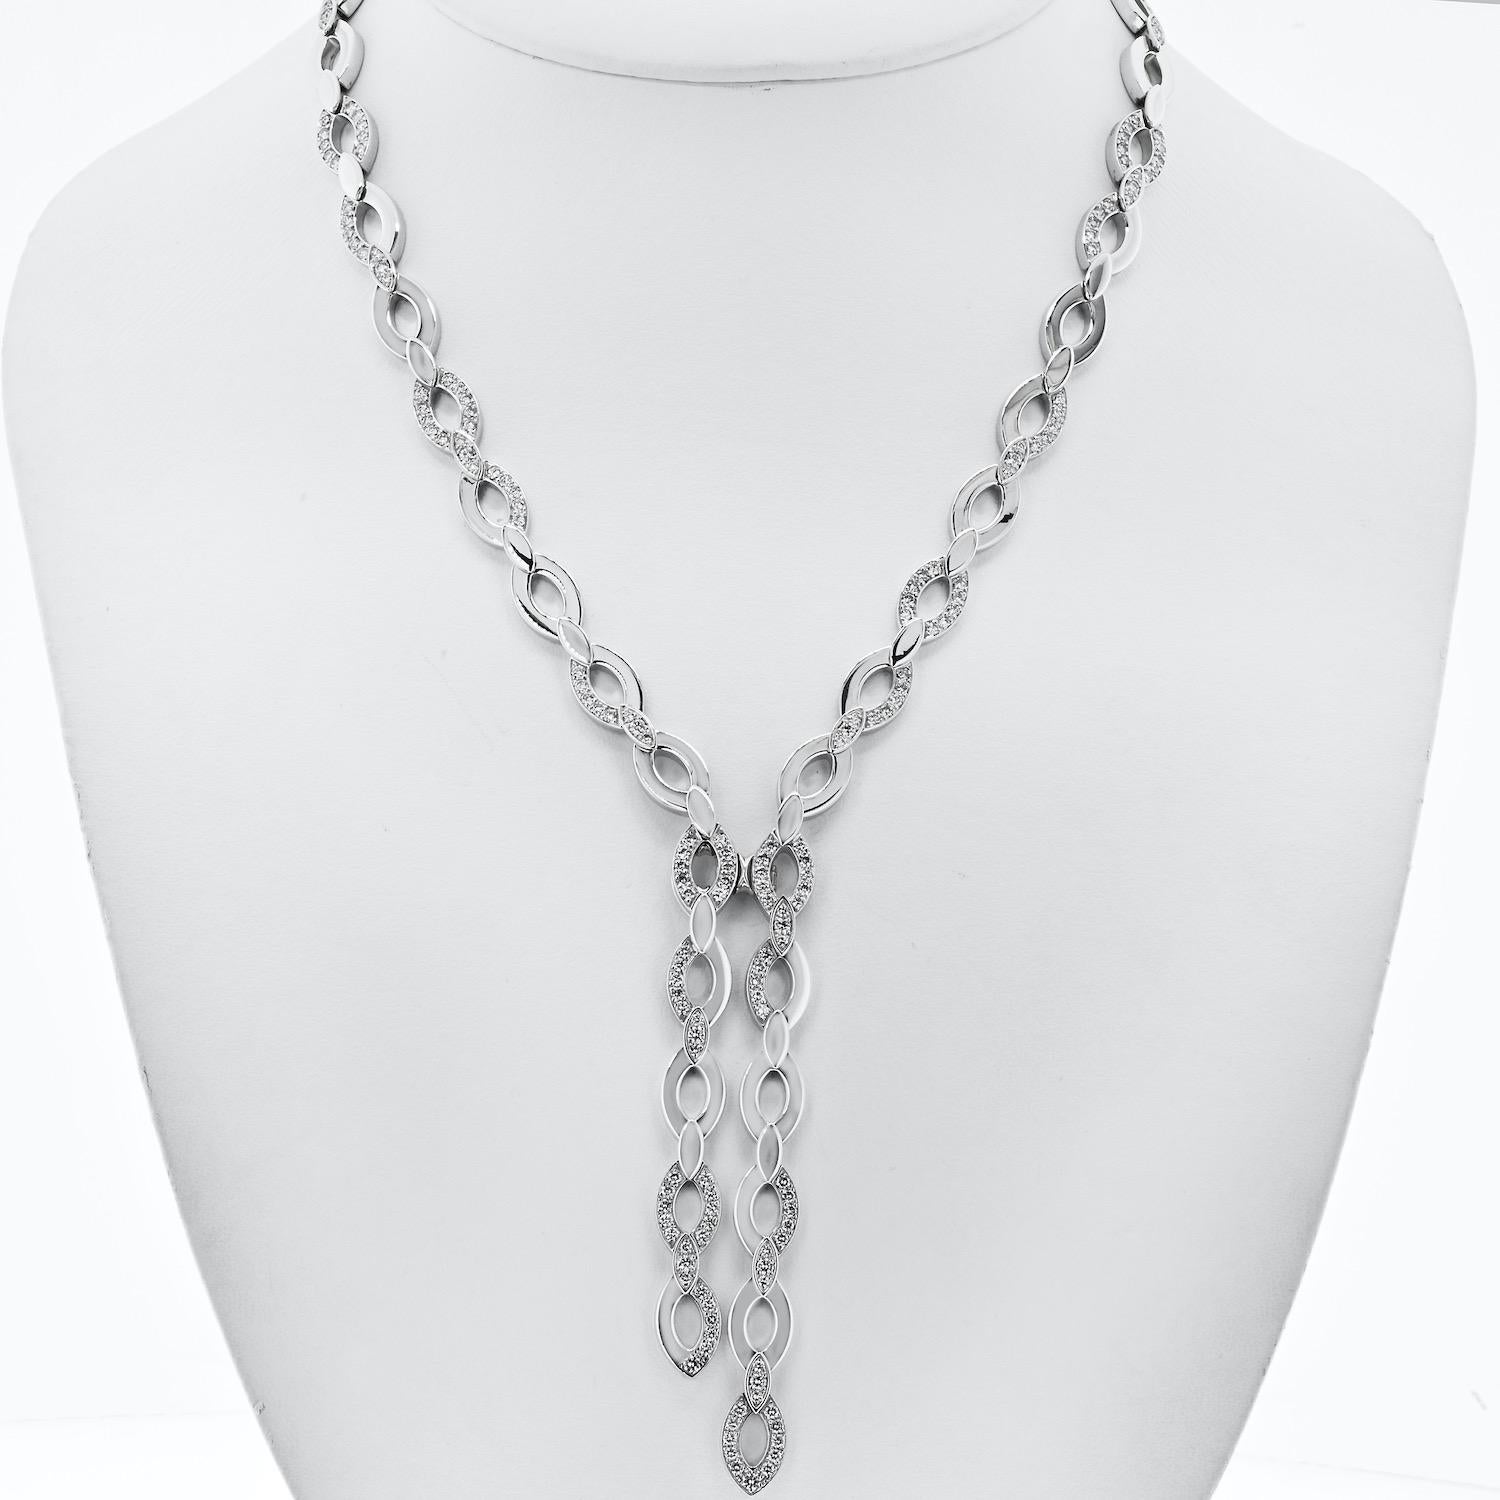 Adorn yourself with the timeless elegance of the Cartier Diadea Lariat Diamond Necklace in 18k White Gold, a piece that seamlessly blends luxury and sophistication. This exquisite necklace boasts a total diamond weight of 3.40 carats, adding a